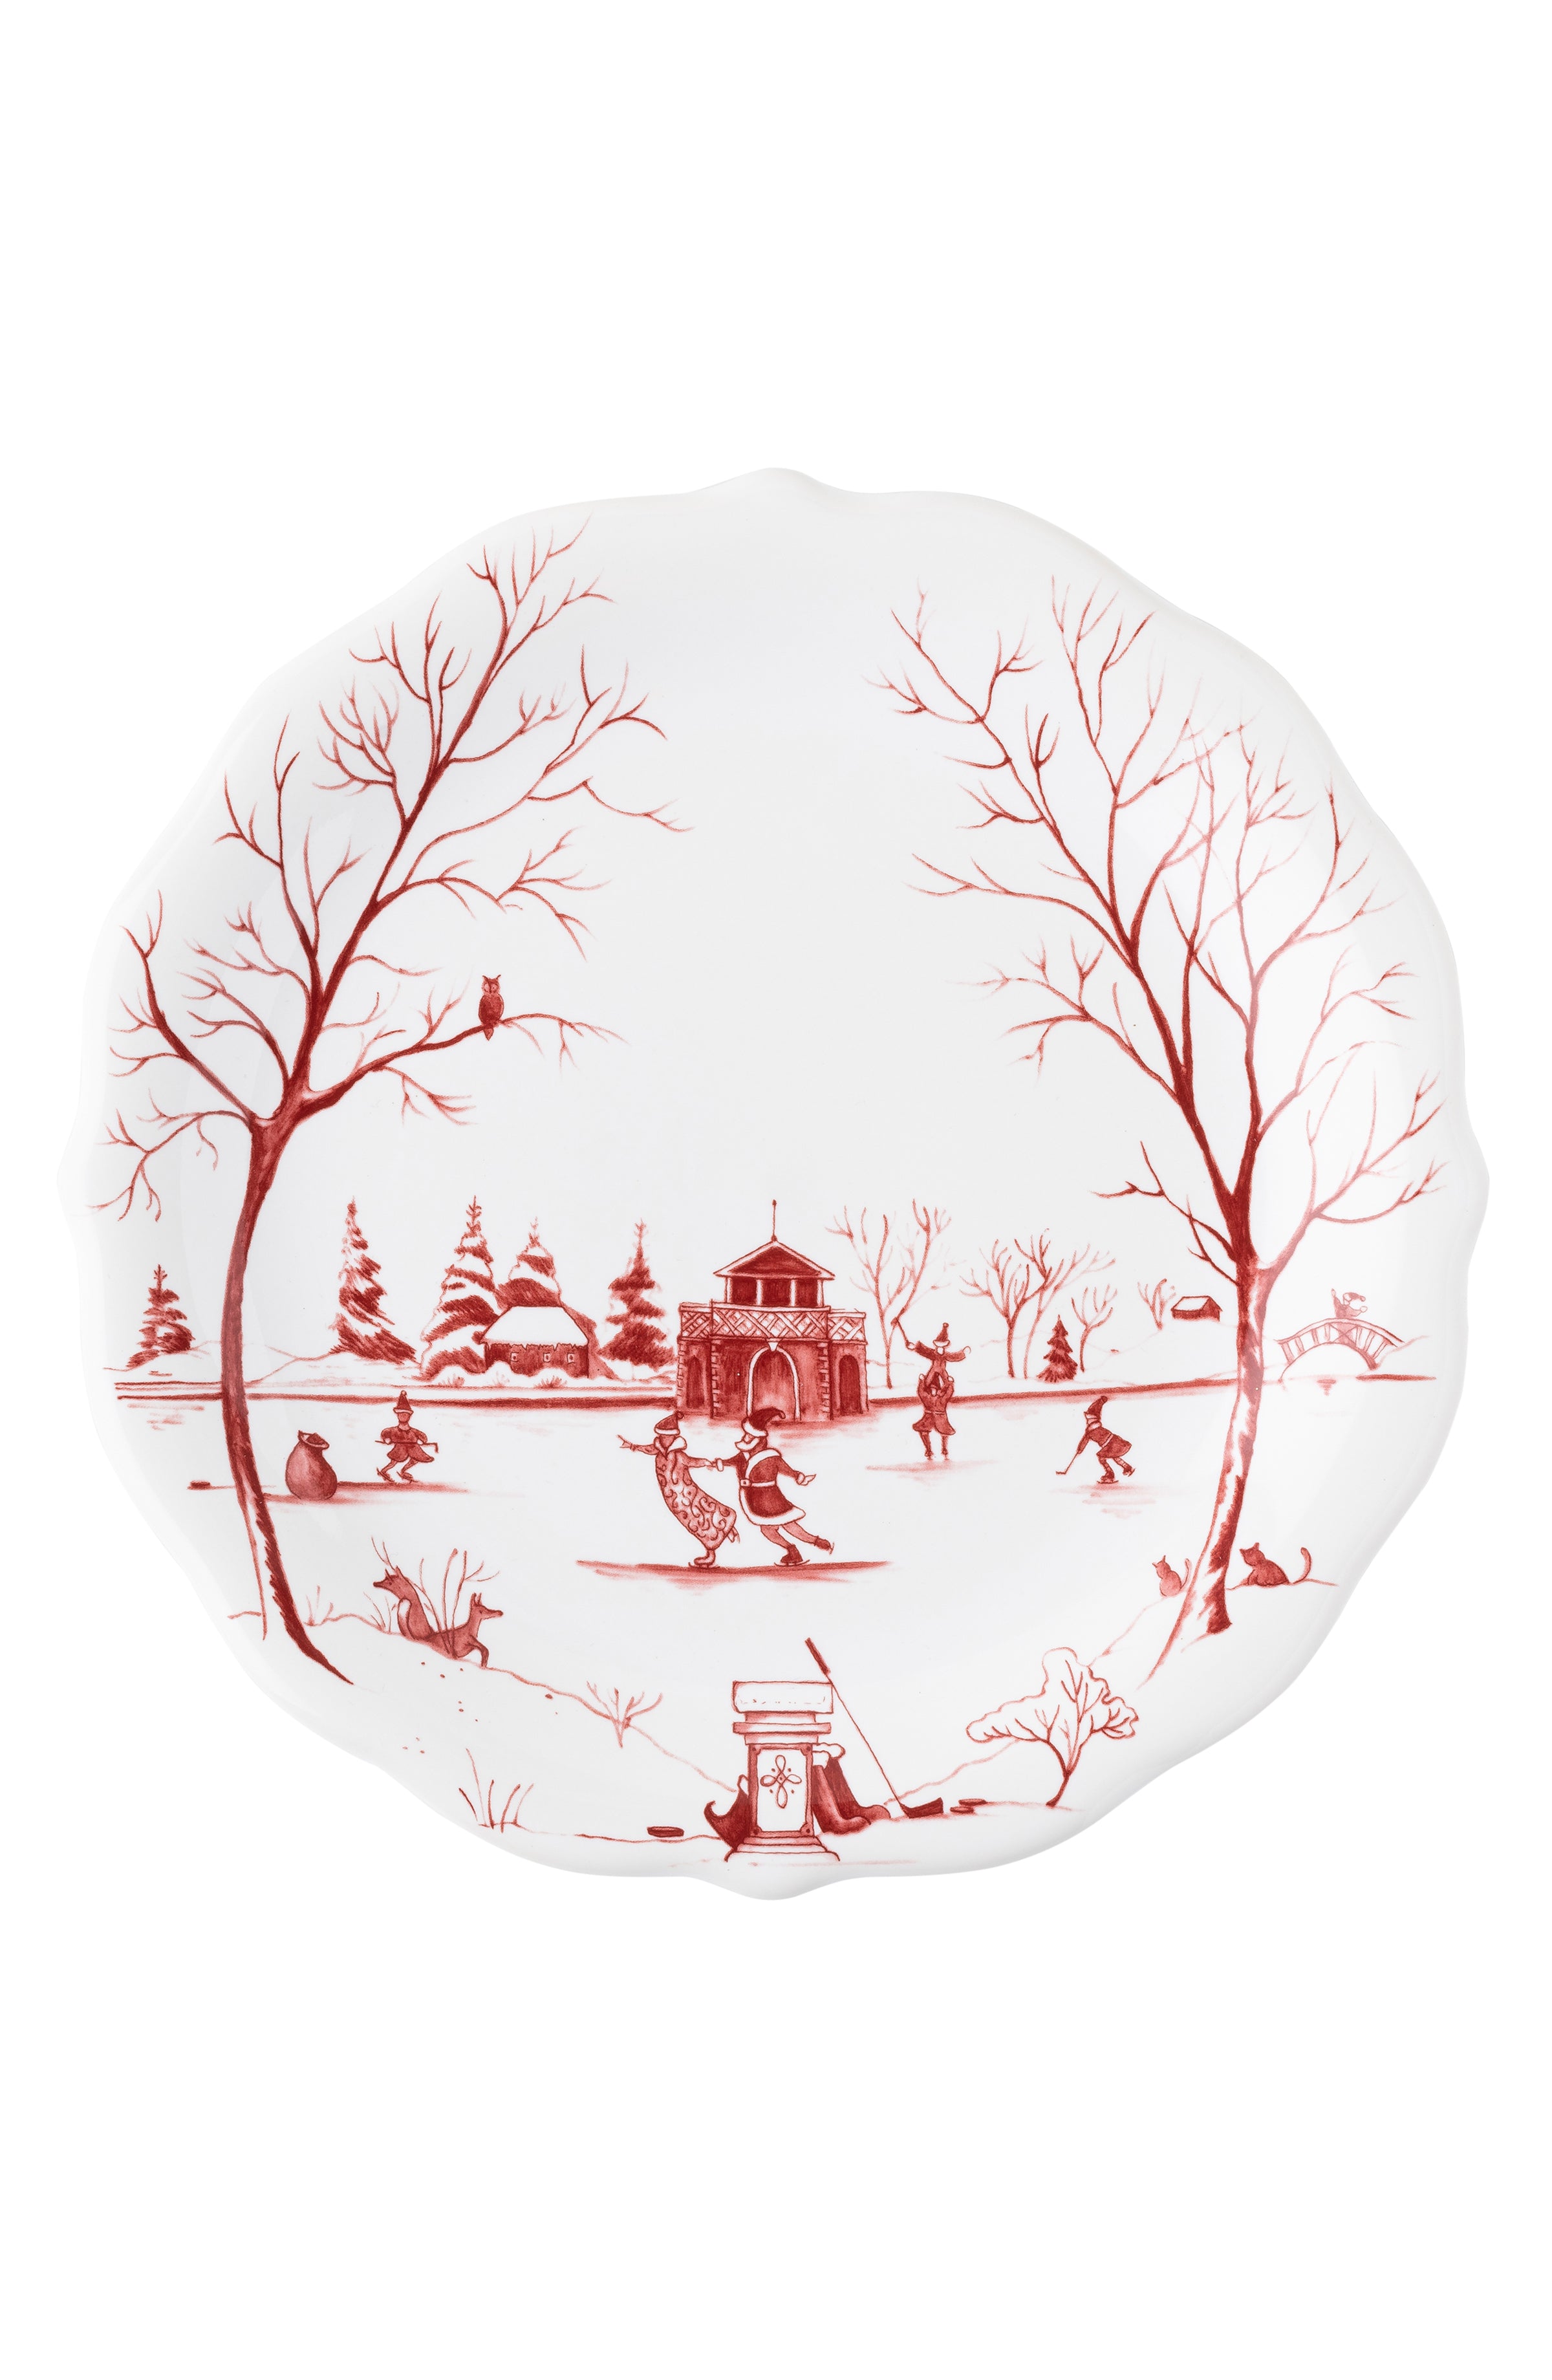 Country Estate Winter Frolic - Salad Plate